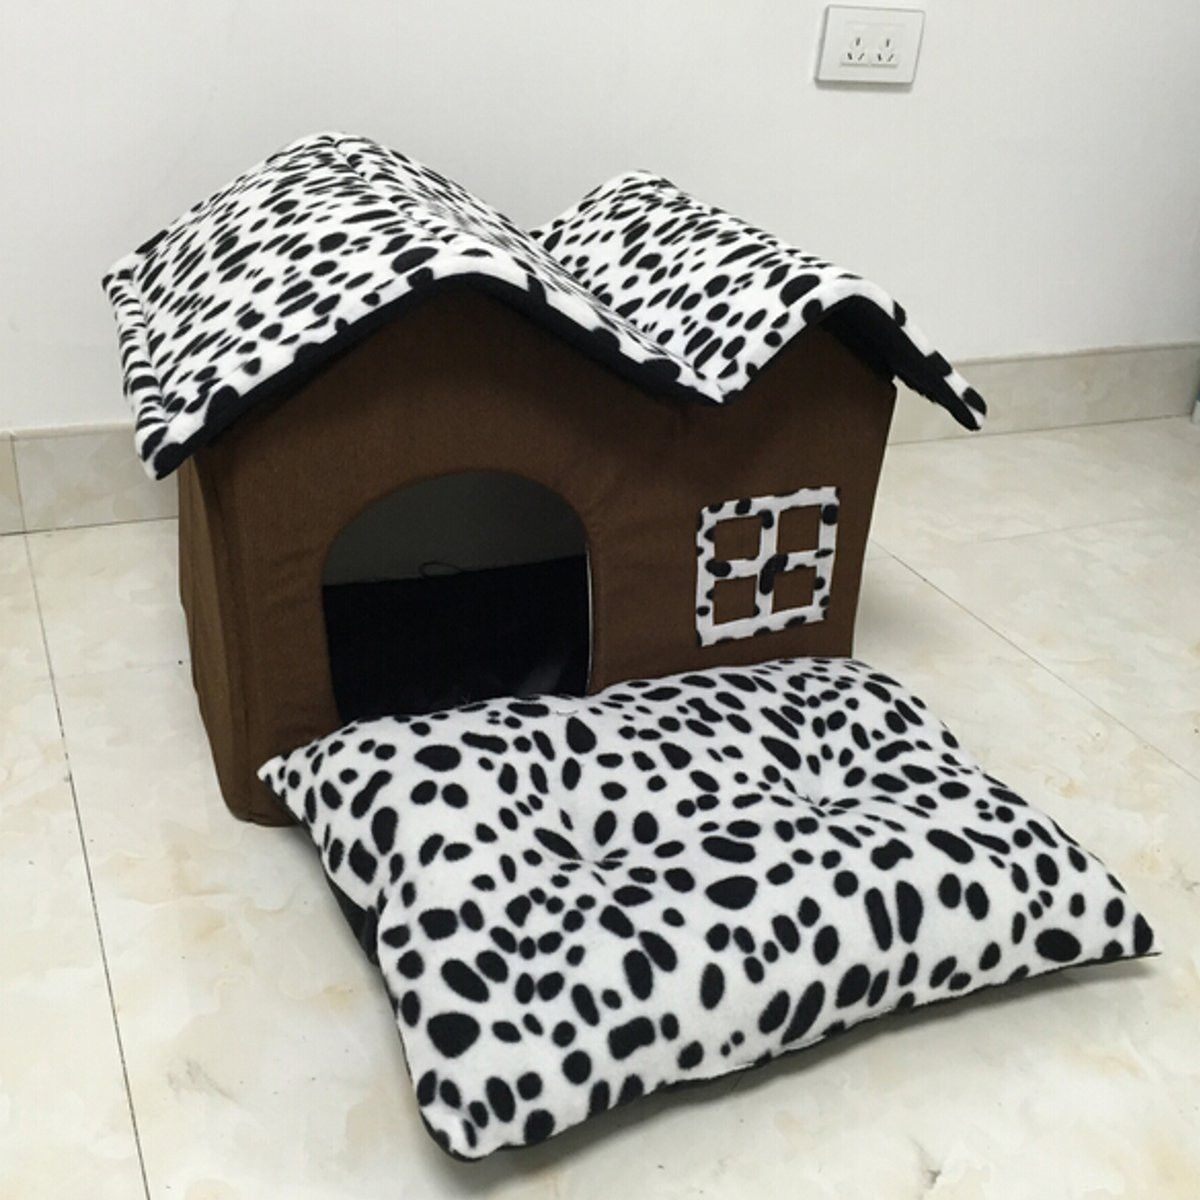 Spotted-Pet-House-Dog-House-Teddy-House-Pet-House-1375653